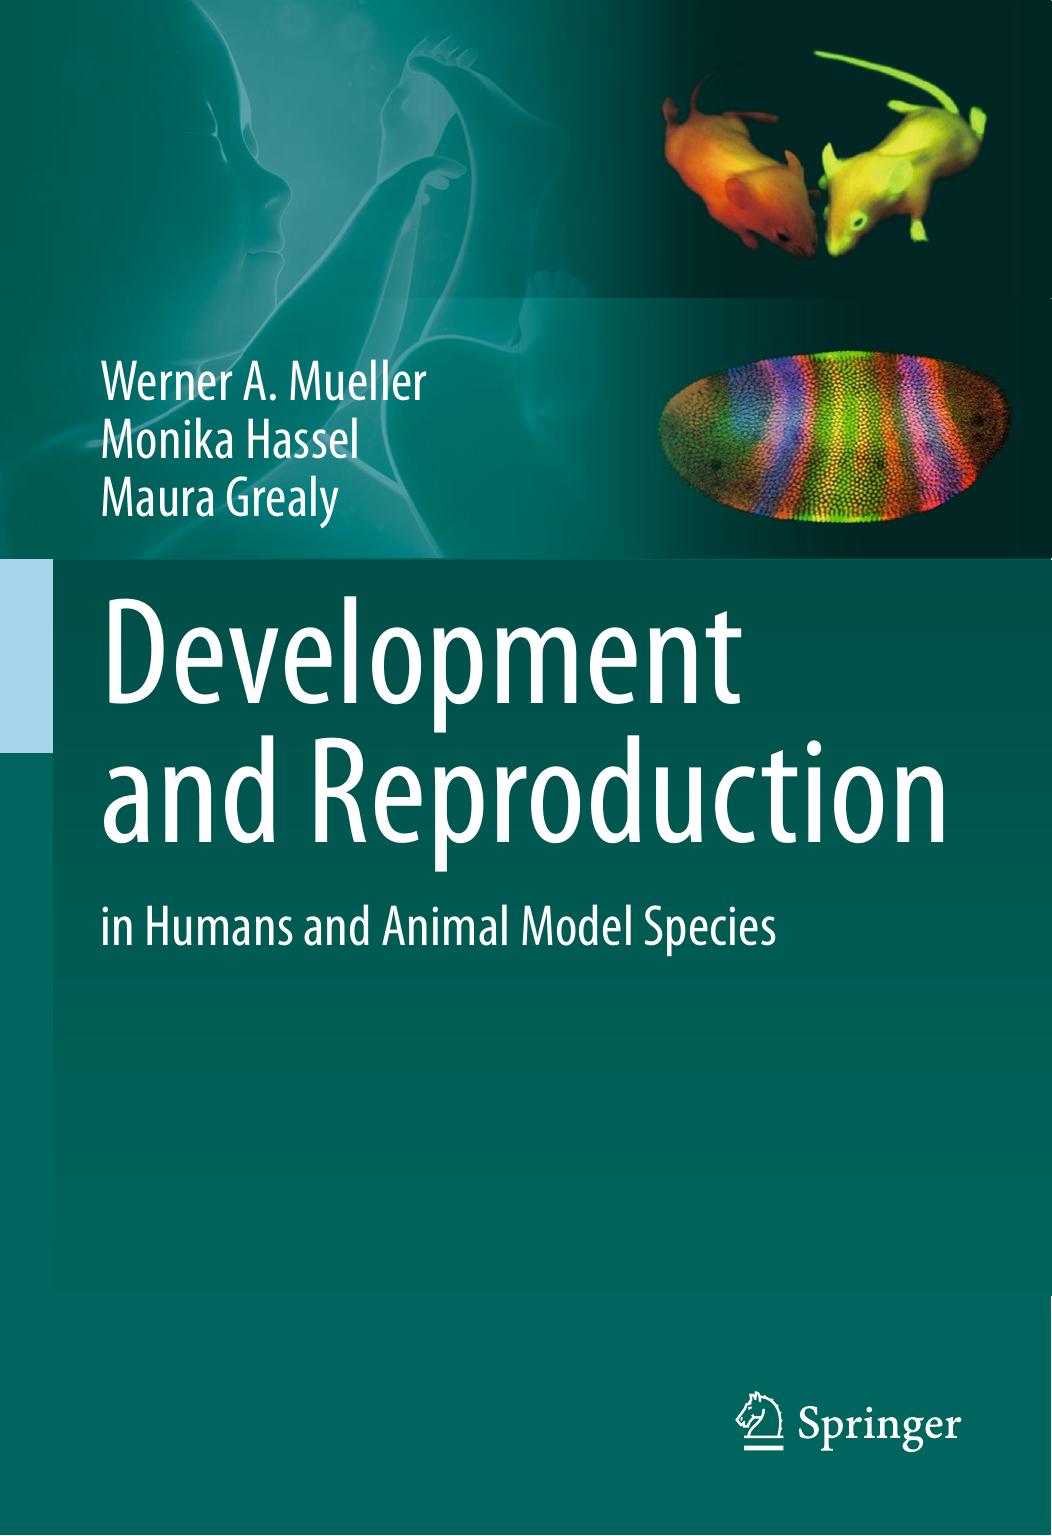 Development and Reproduction in Humans and Animal Model Species 2015